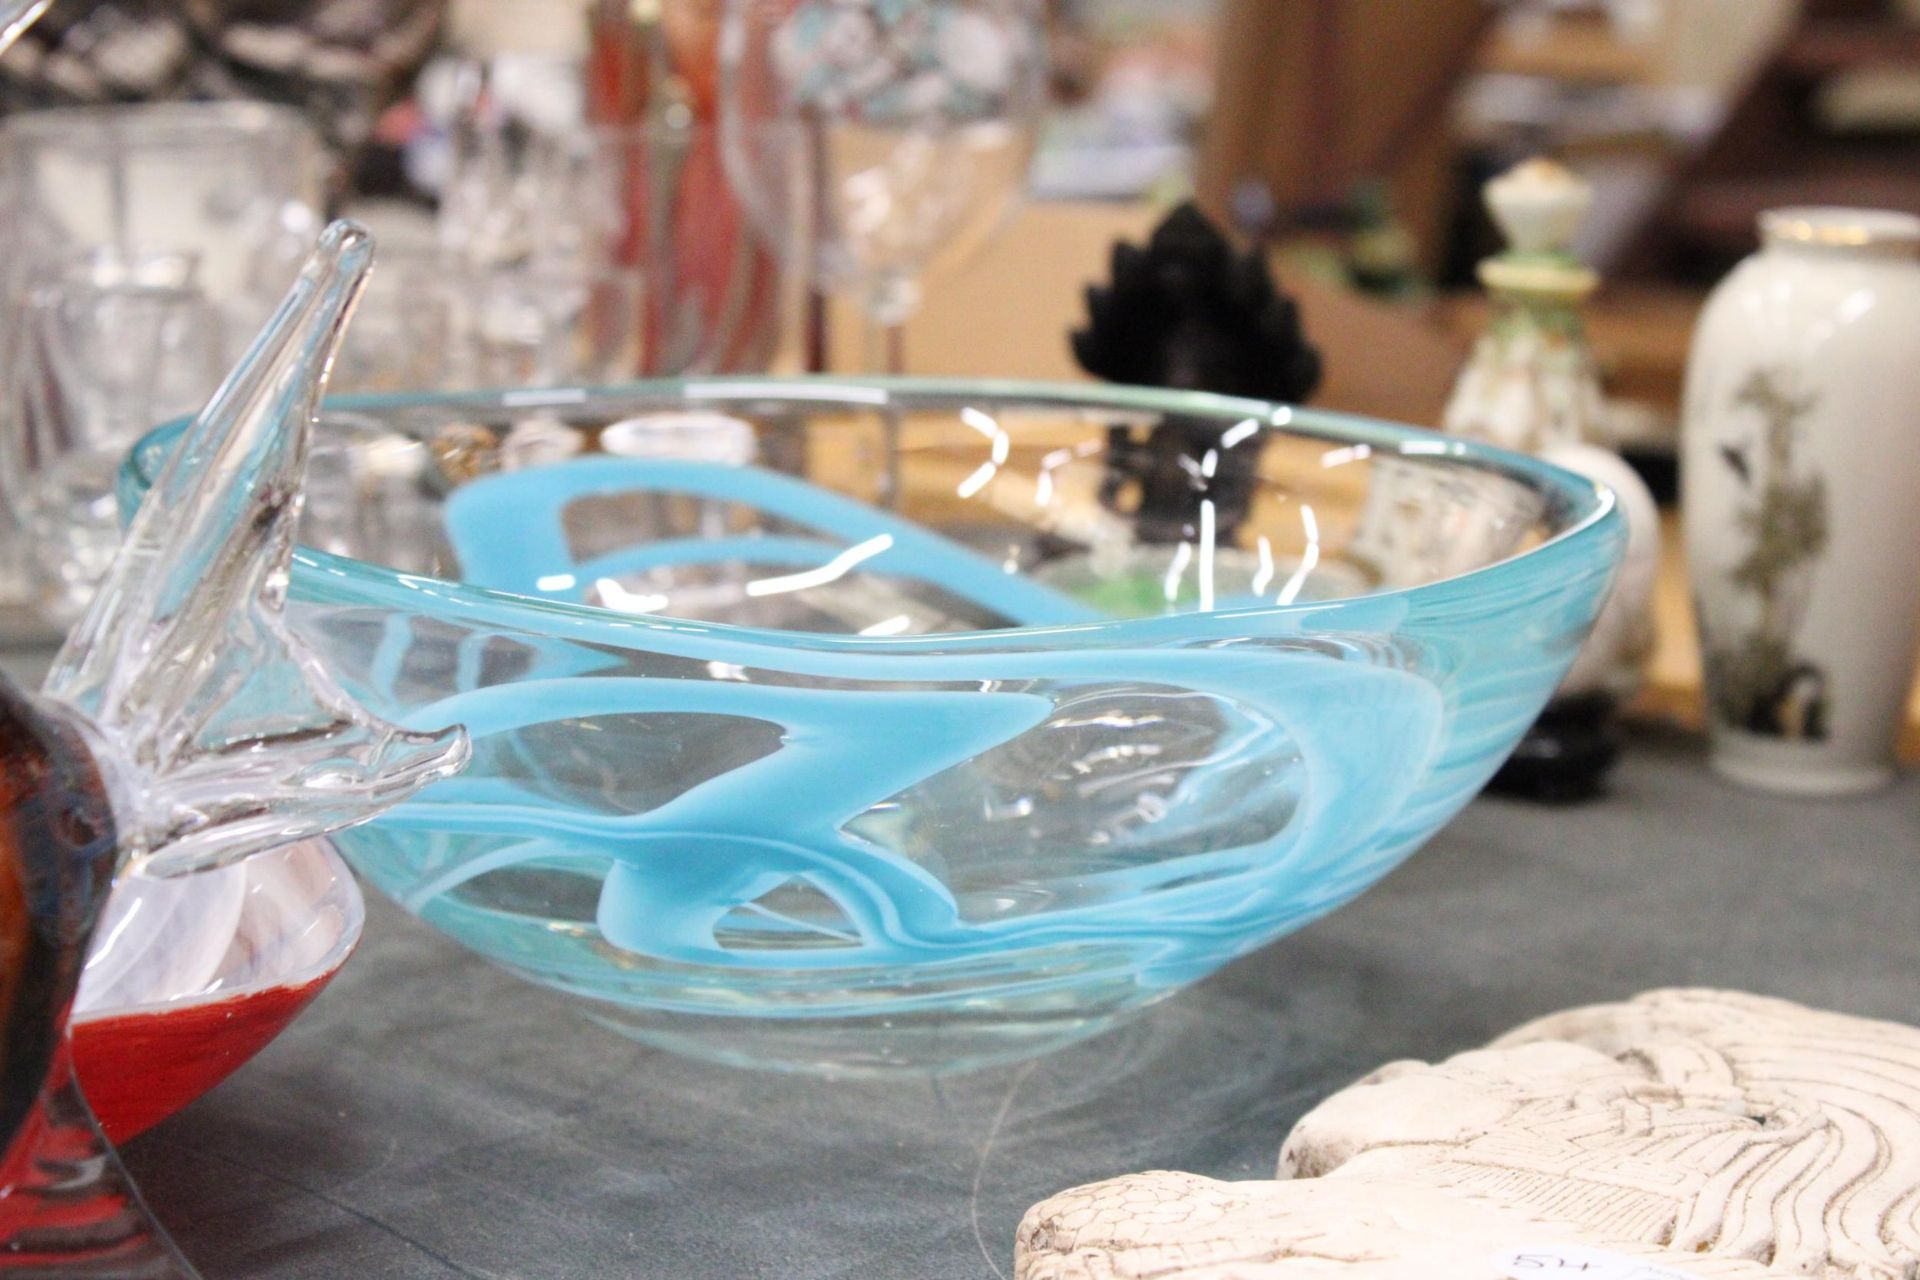 TWO HEAVY ART GLASS BOWLS PLUS A VINCENZA MODEL OF A FISH - Image 5 of 5